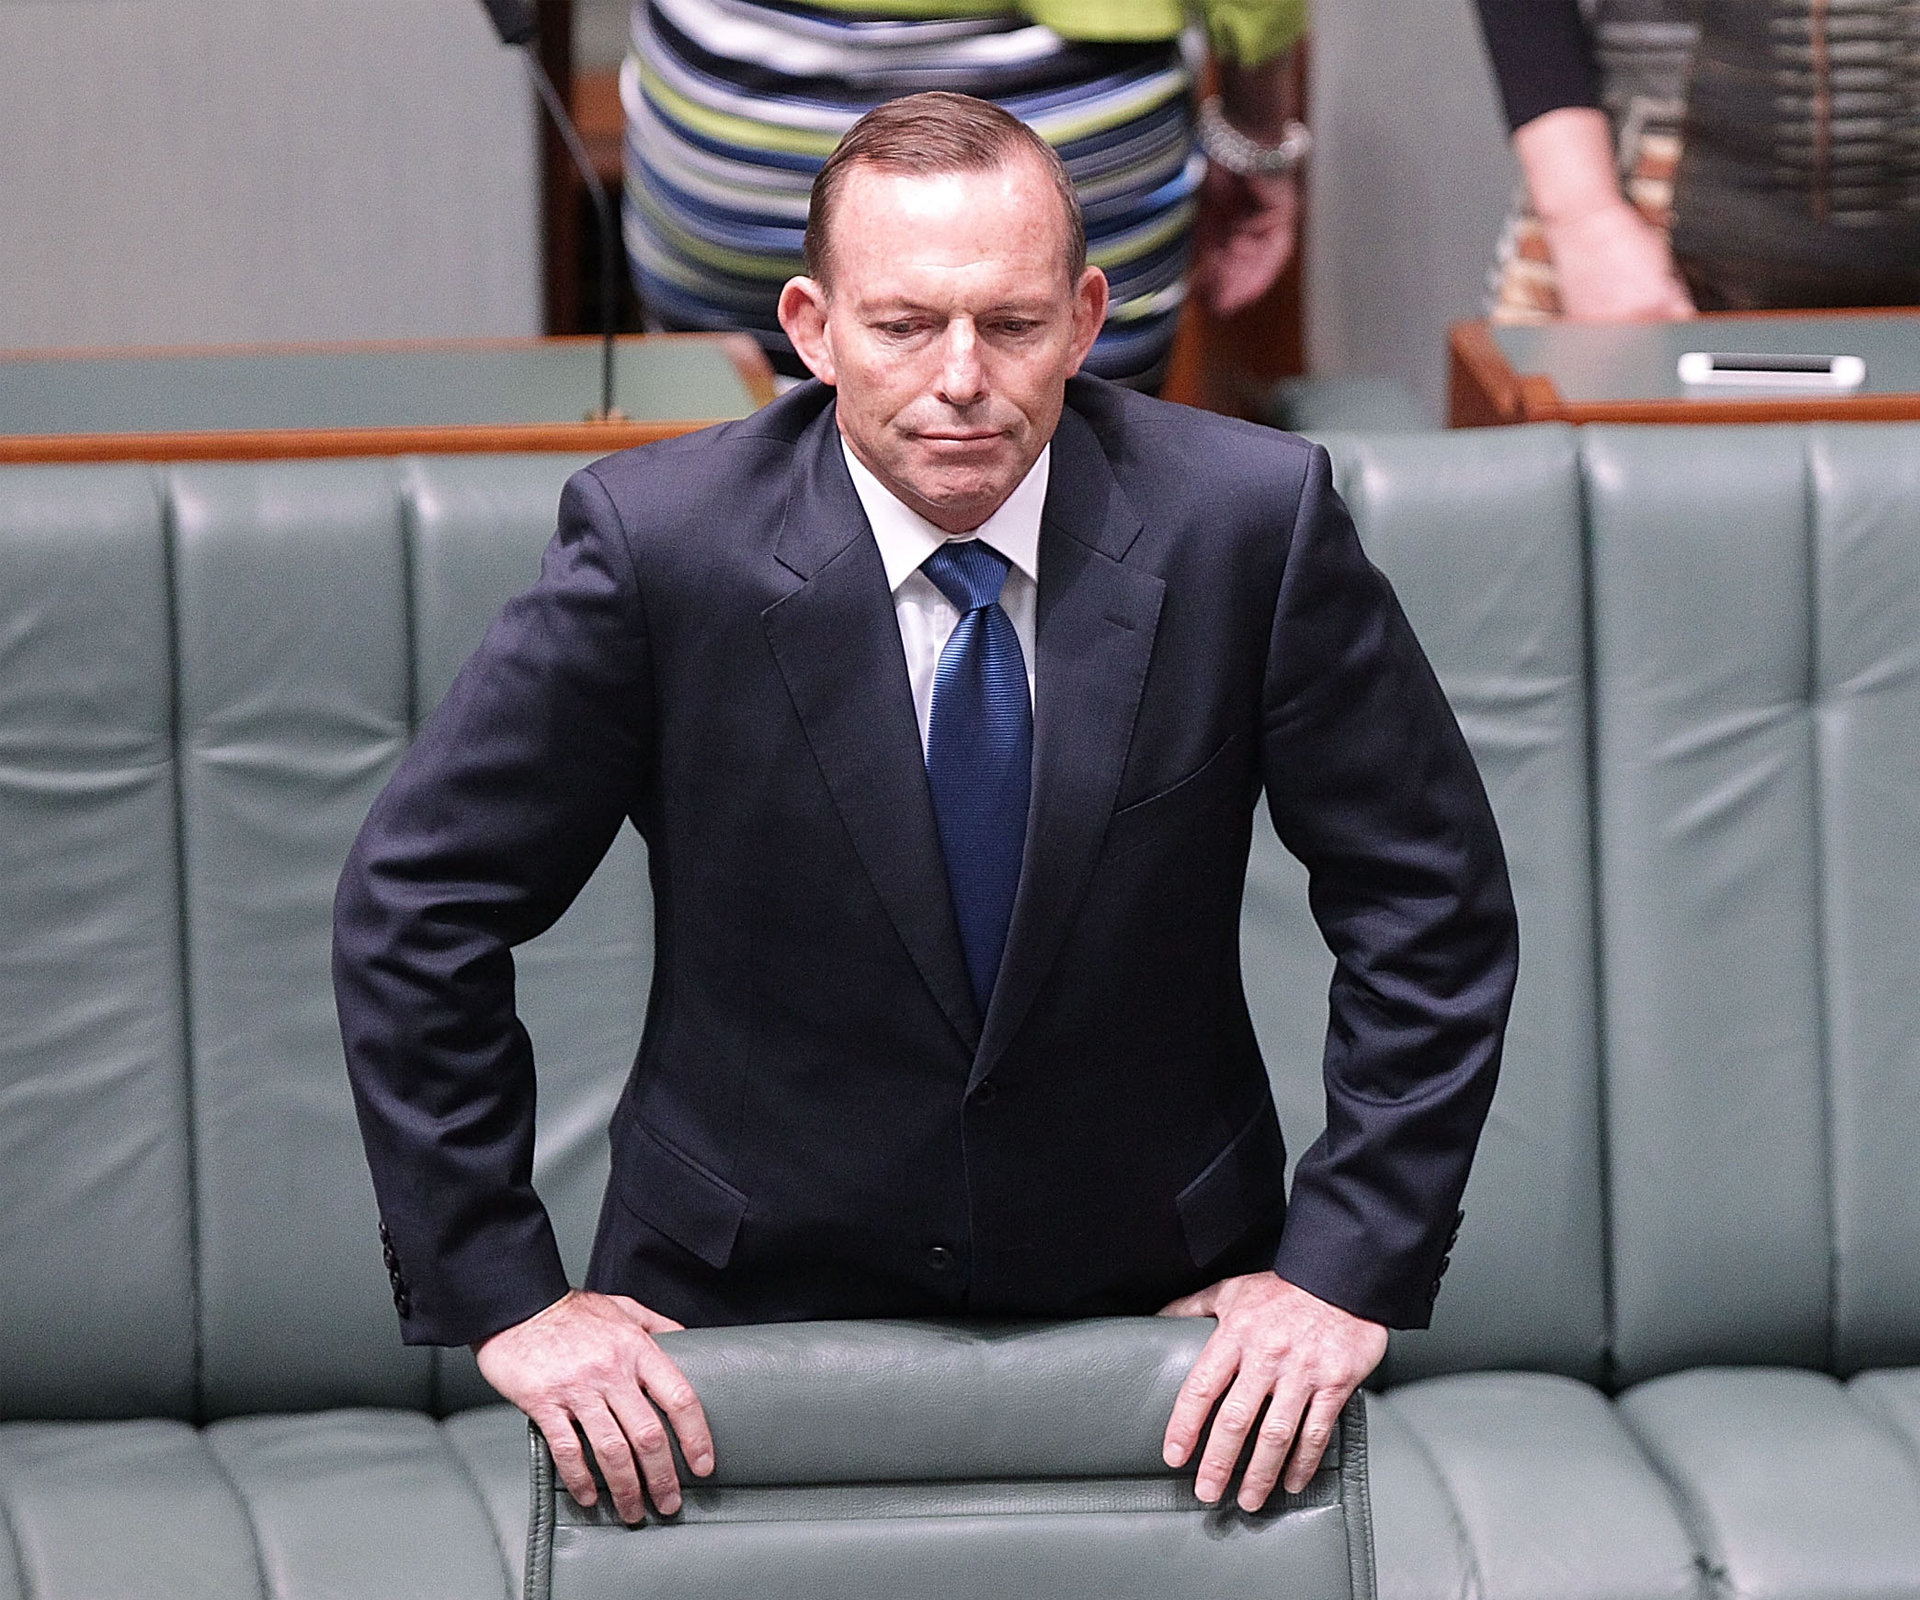 Abbott government refuse free vote on same-sex marriage